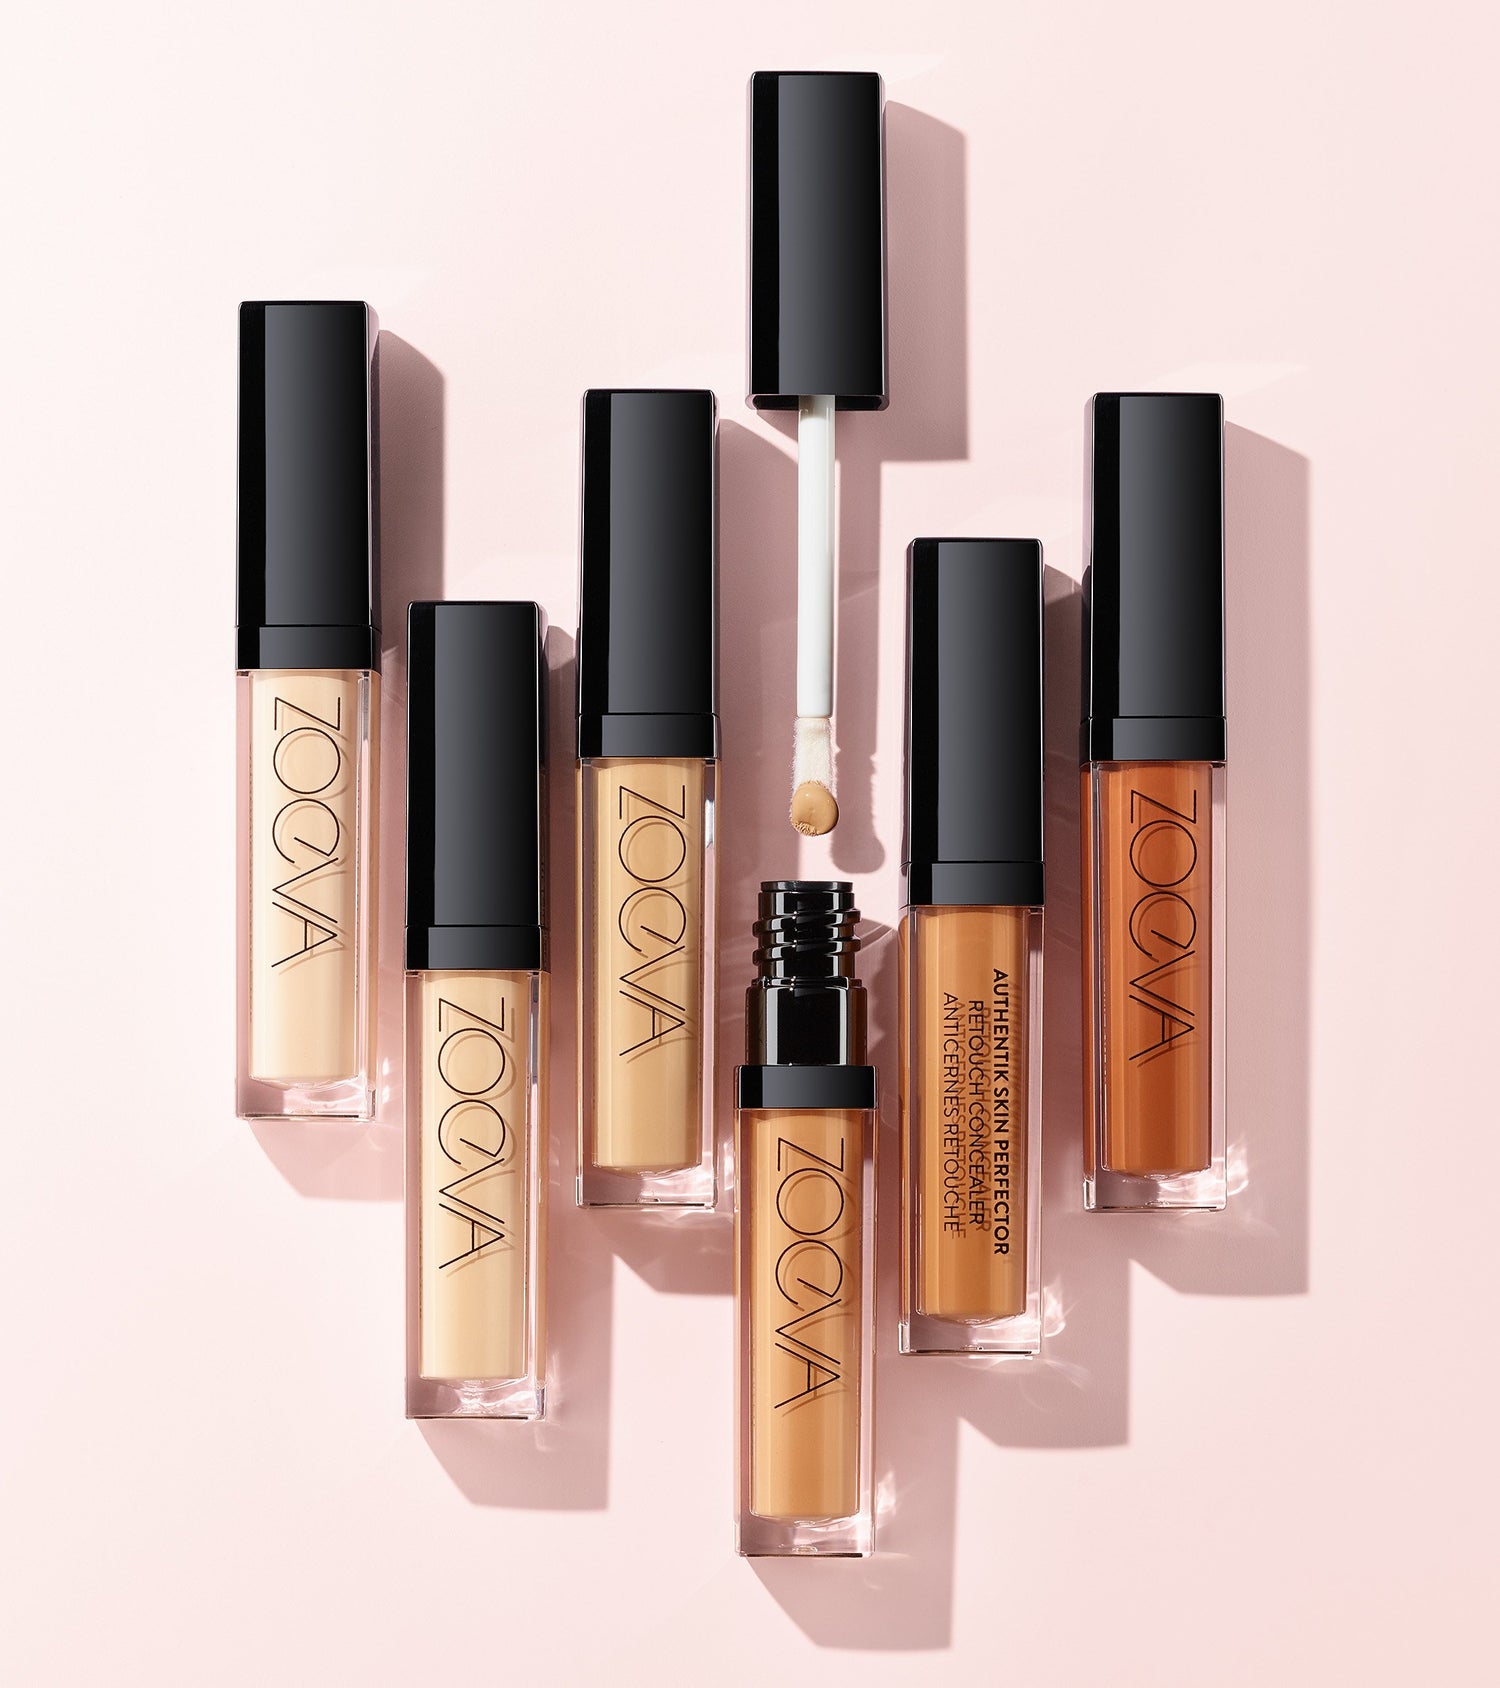 AUTHENTIK SKIN PERFECTOR CONCEALER (020 ACCURATE) Main Image featured